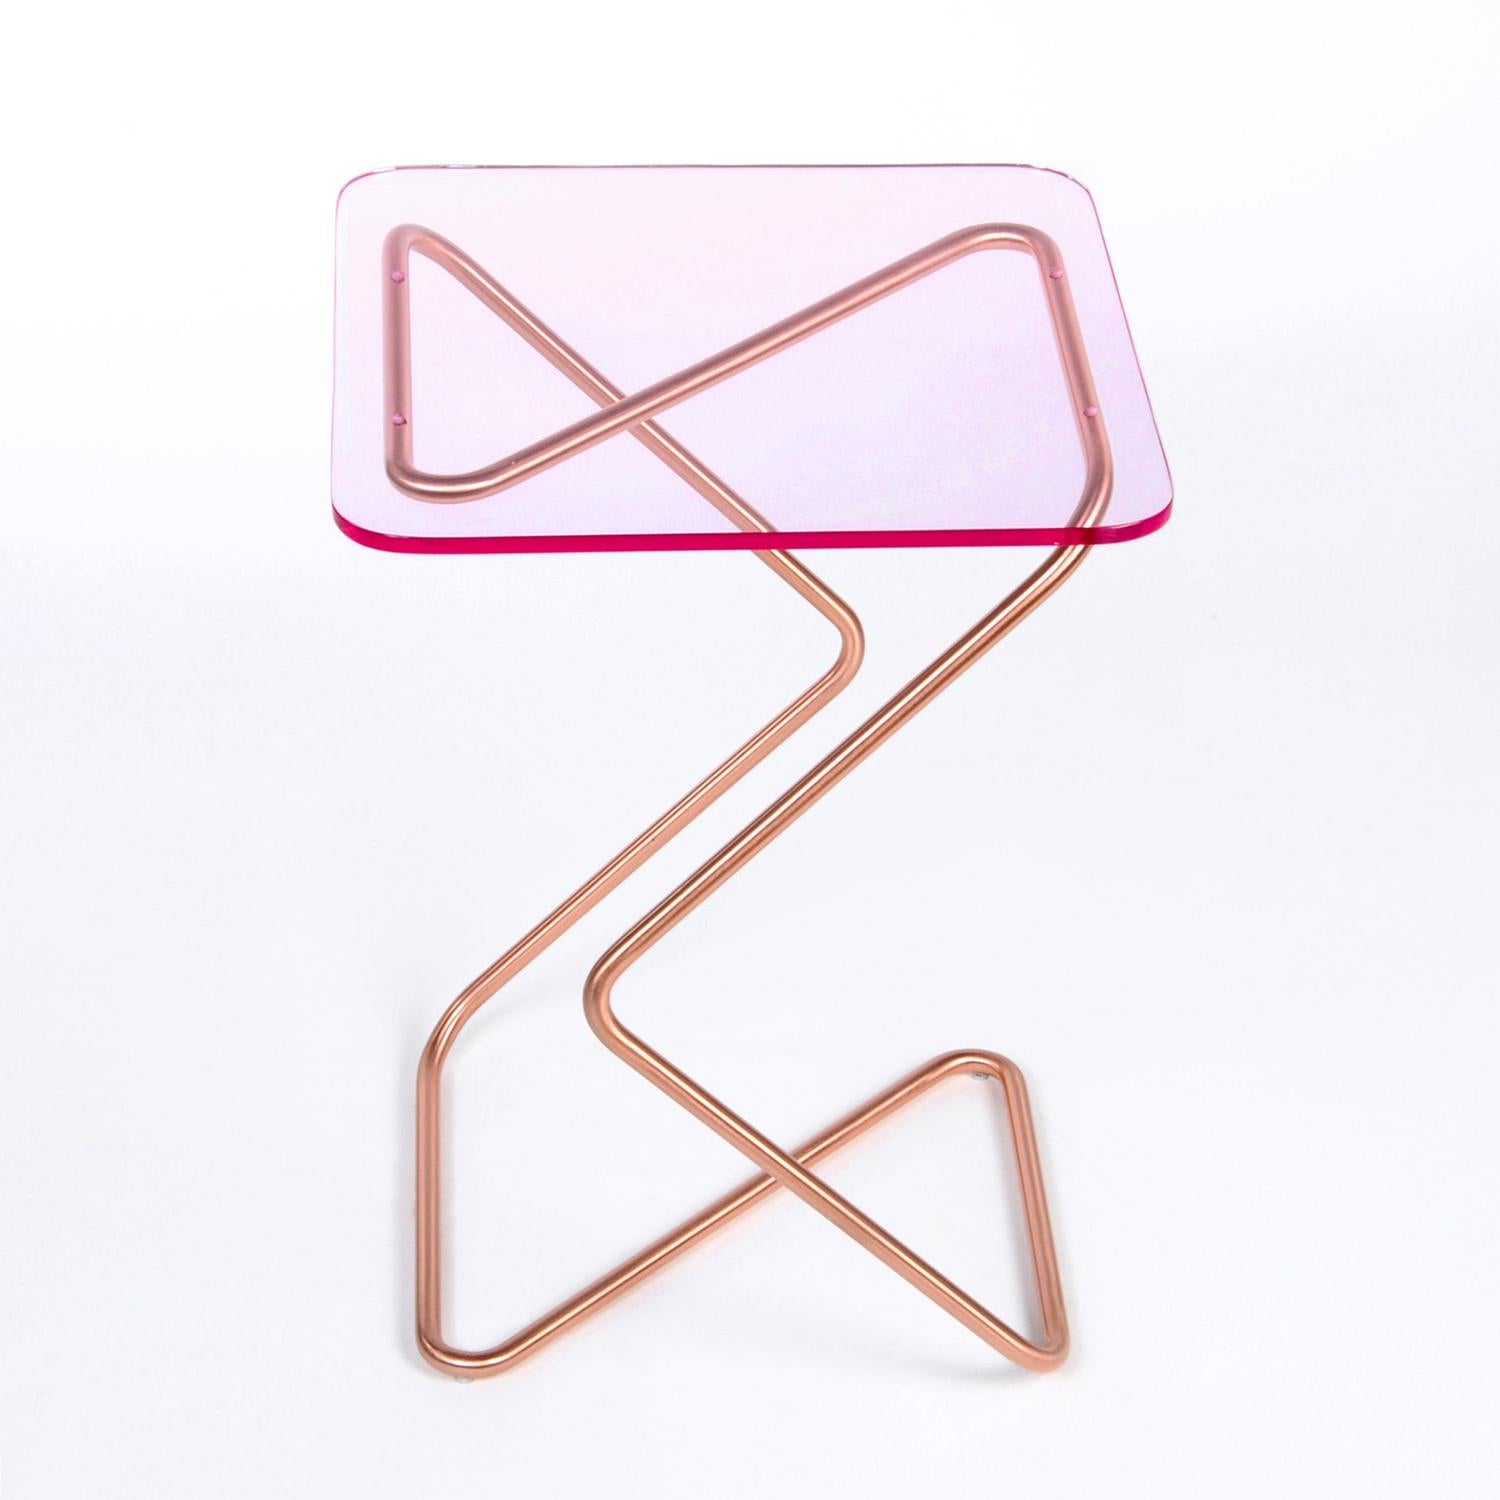 The square side table by Rita Kettaneh 
Dimensions: The base: brushed stainless steel plated with copper 
 optionally plated with copper or brass
 The top: acrylic
Materials: H 46 x W 33 x D 33 cm
Weight: 3.75 Kg

Colors and finishes: